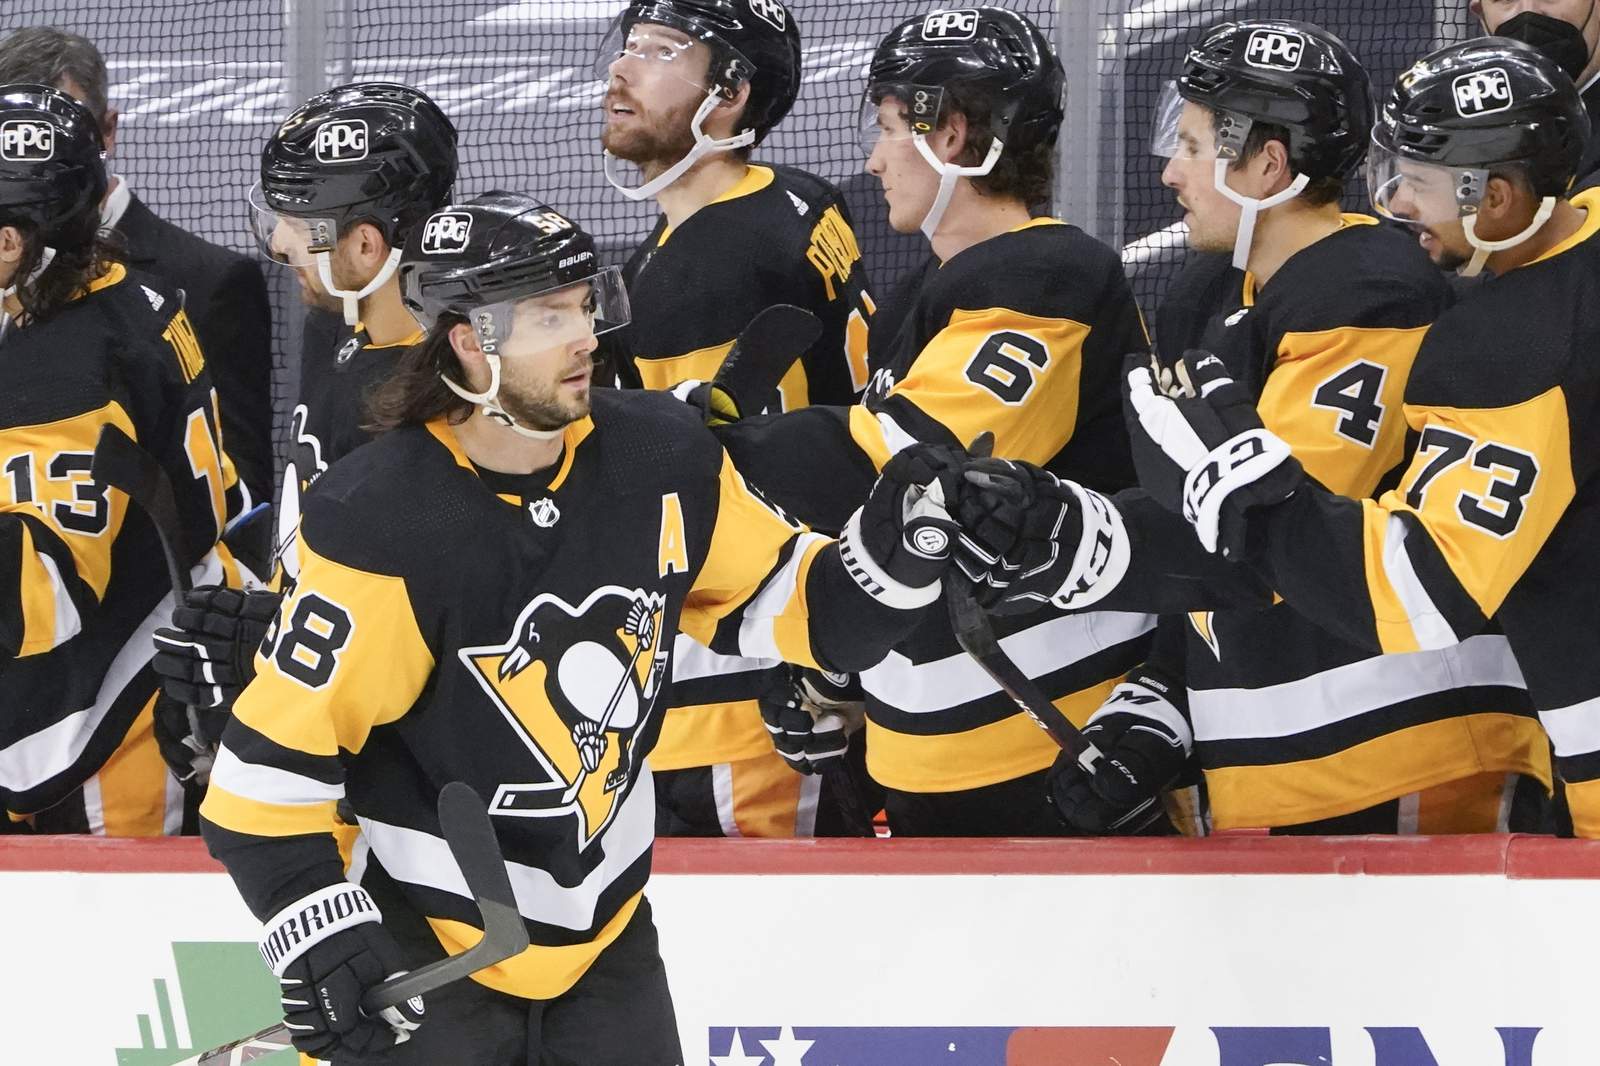 DeSmith stops 31 shots as Pens power past Flyers, 5-1, Sports